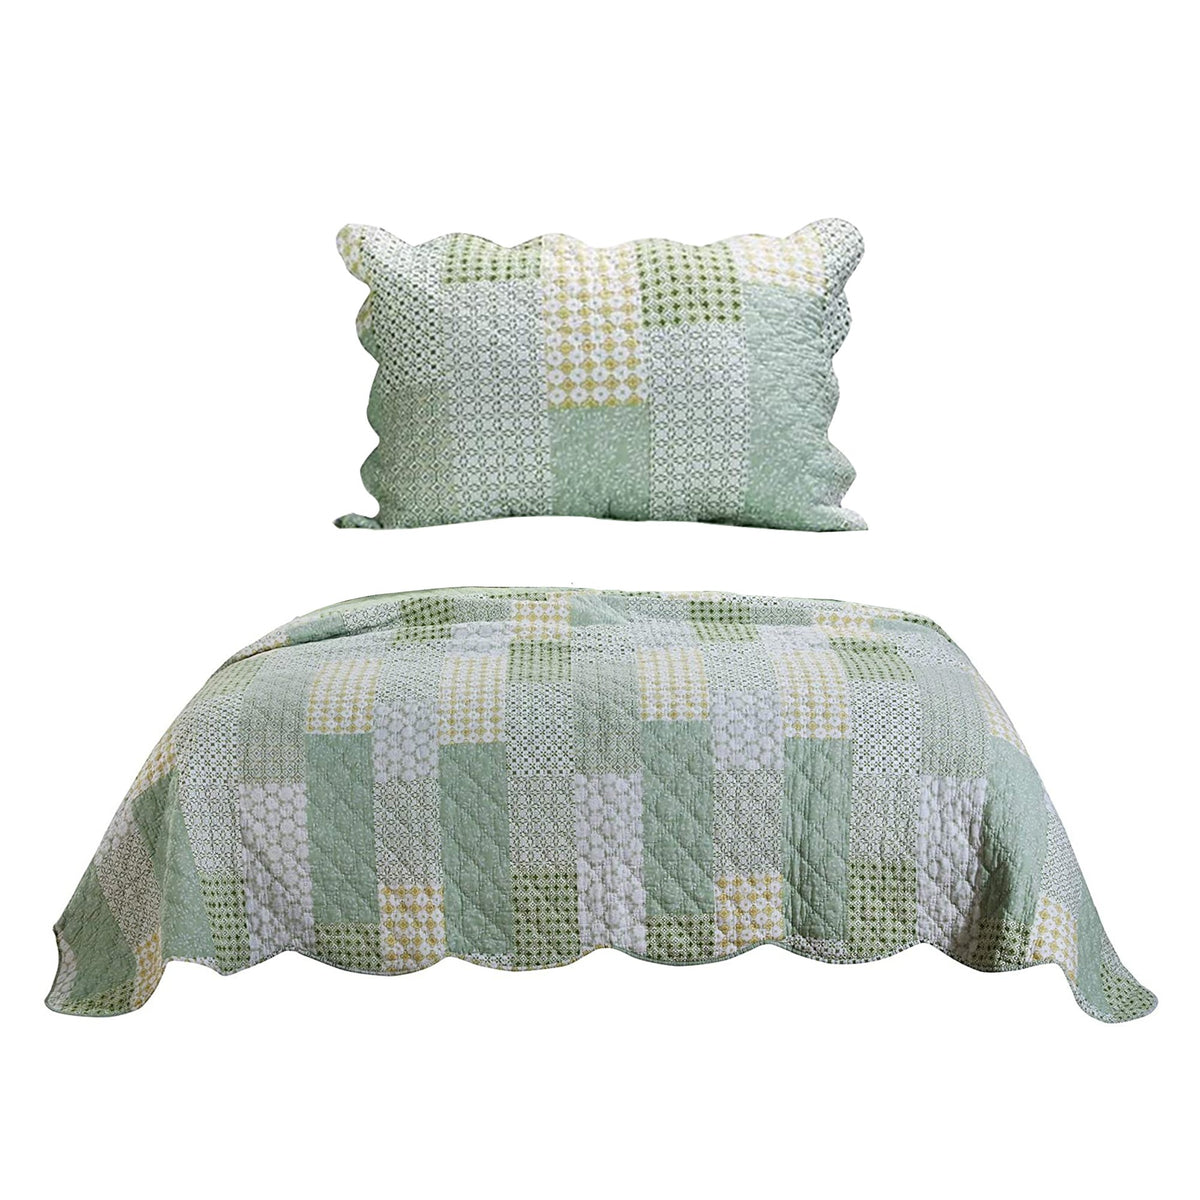 Reversible Fabric Twin Size Quilt Set with Geometric Pattern Motif, Green - BM219433